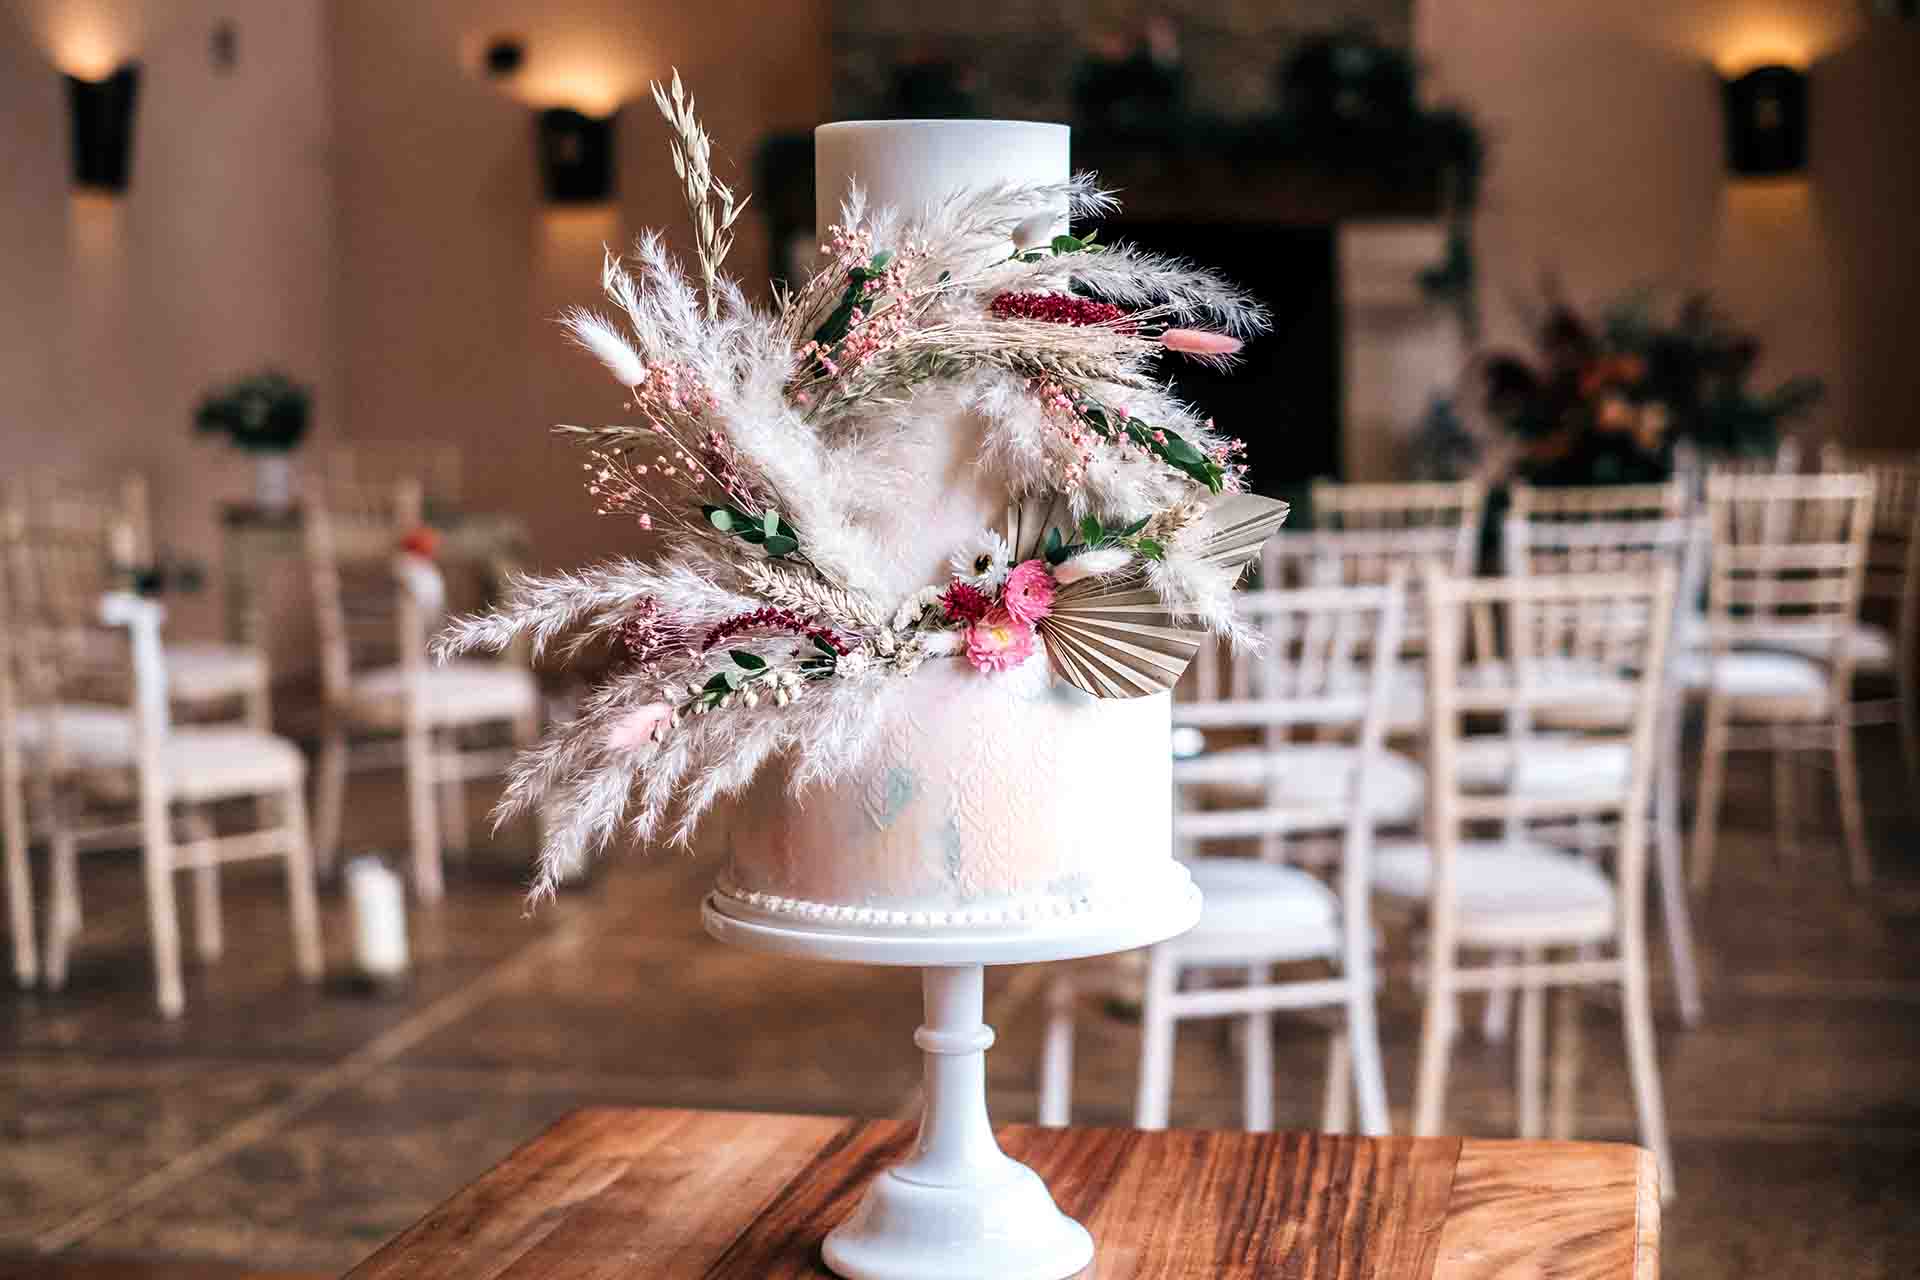 Wedding Cake Decorated With Grasses